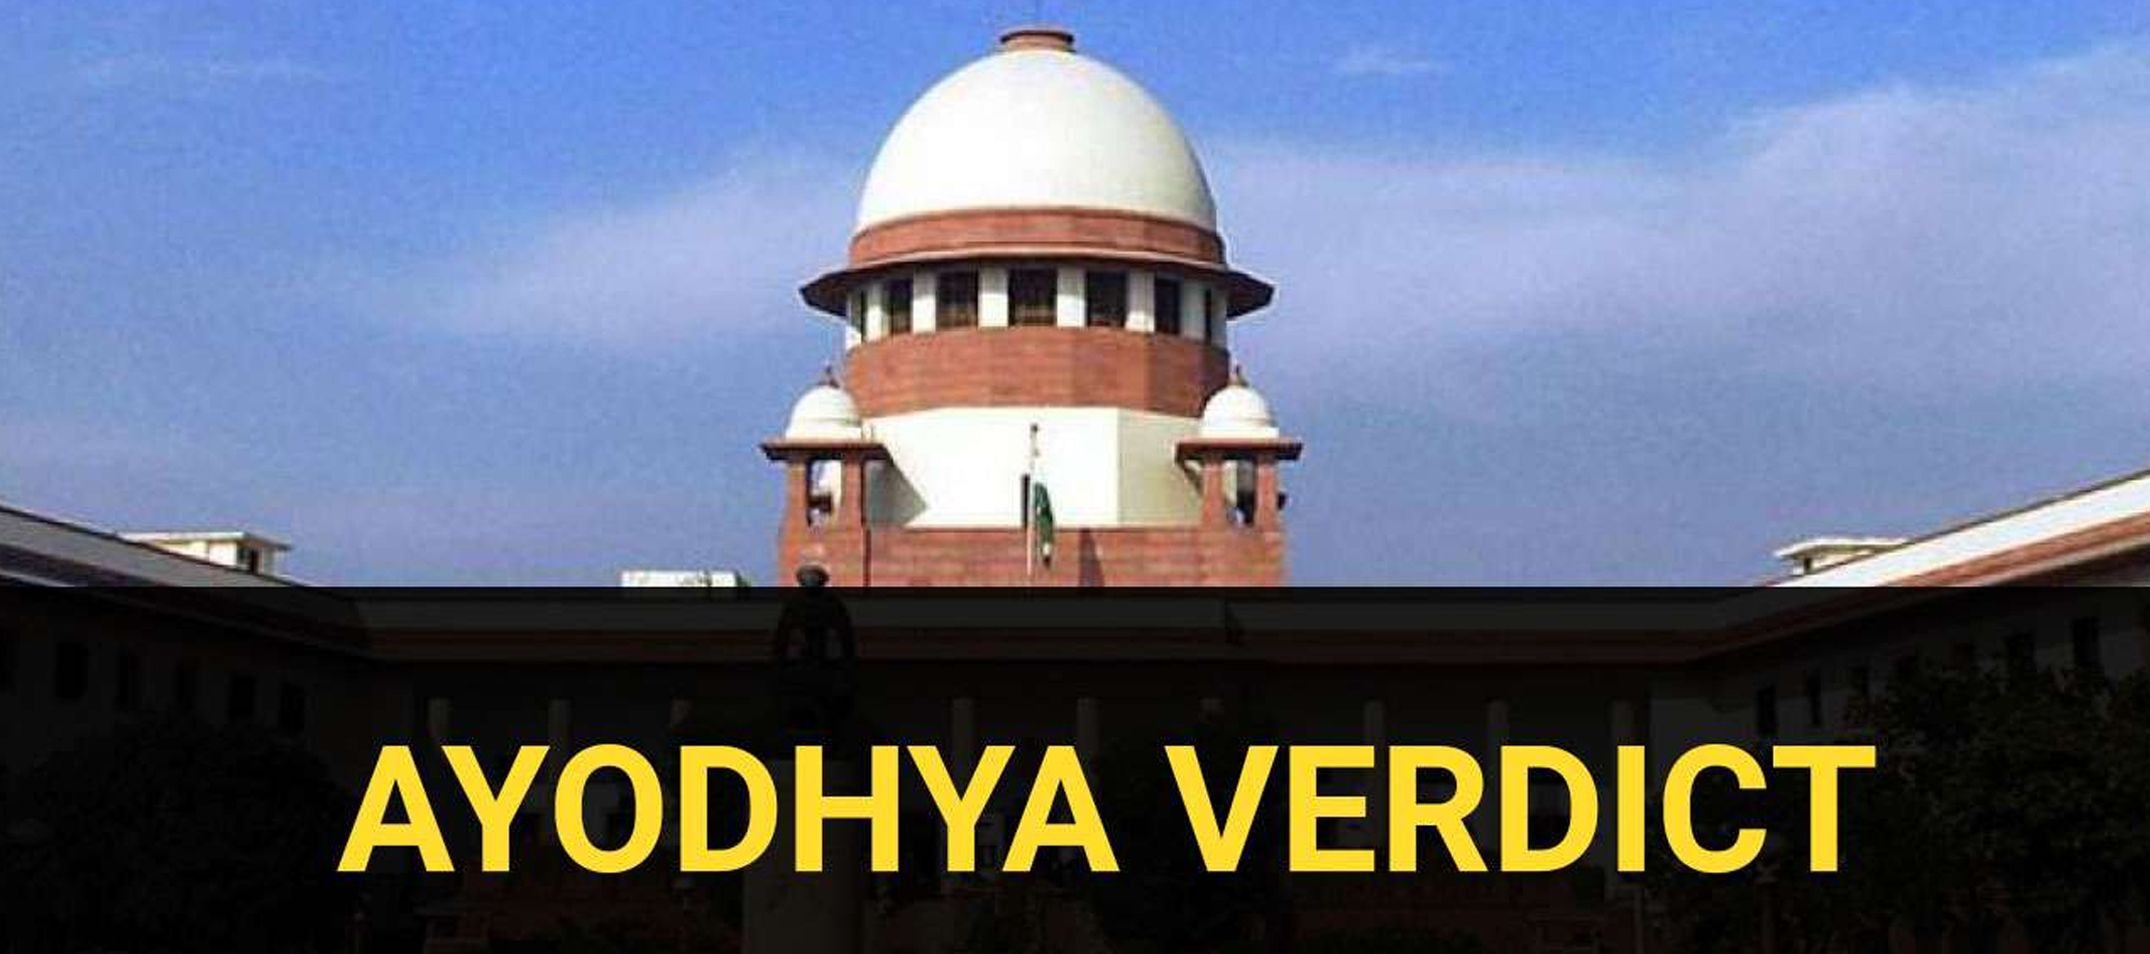 Ayodhya verdict announced by the Supreme Court